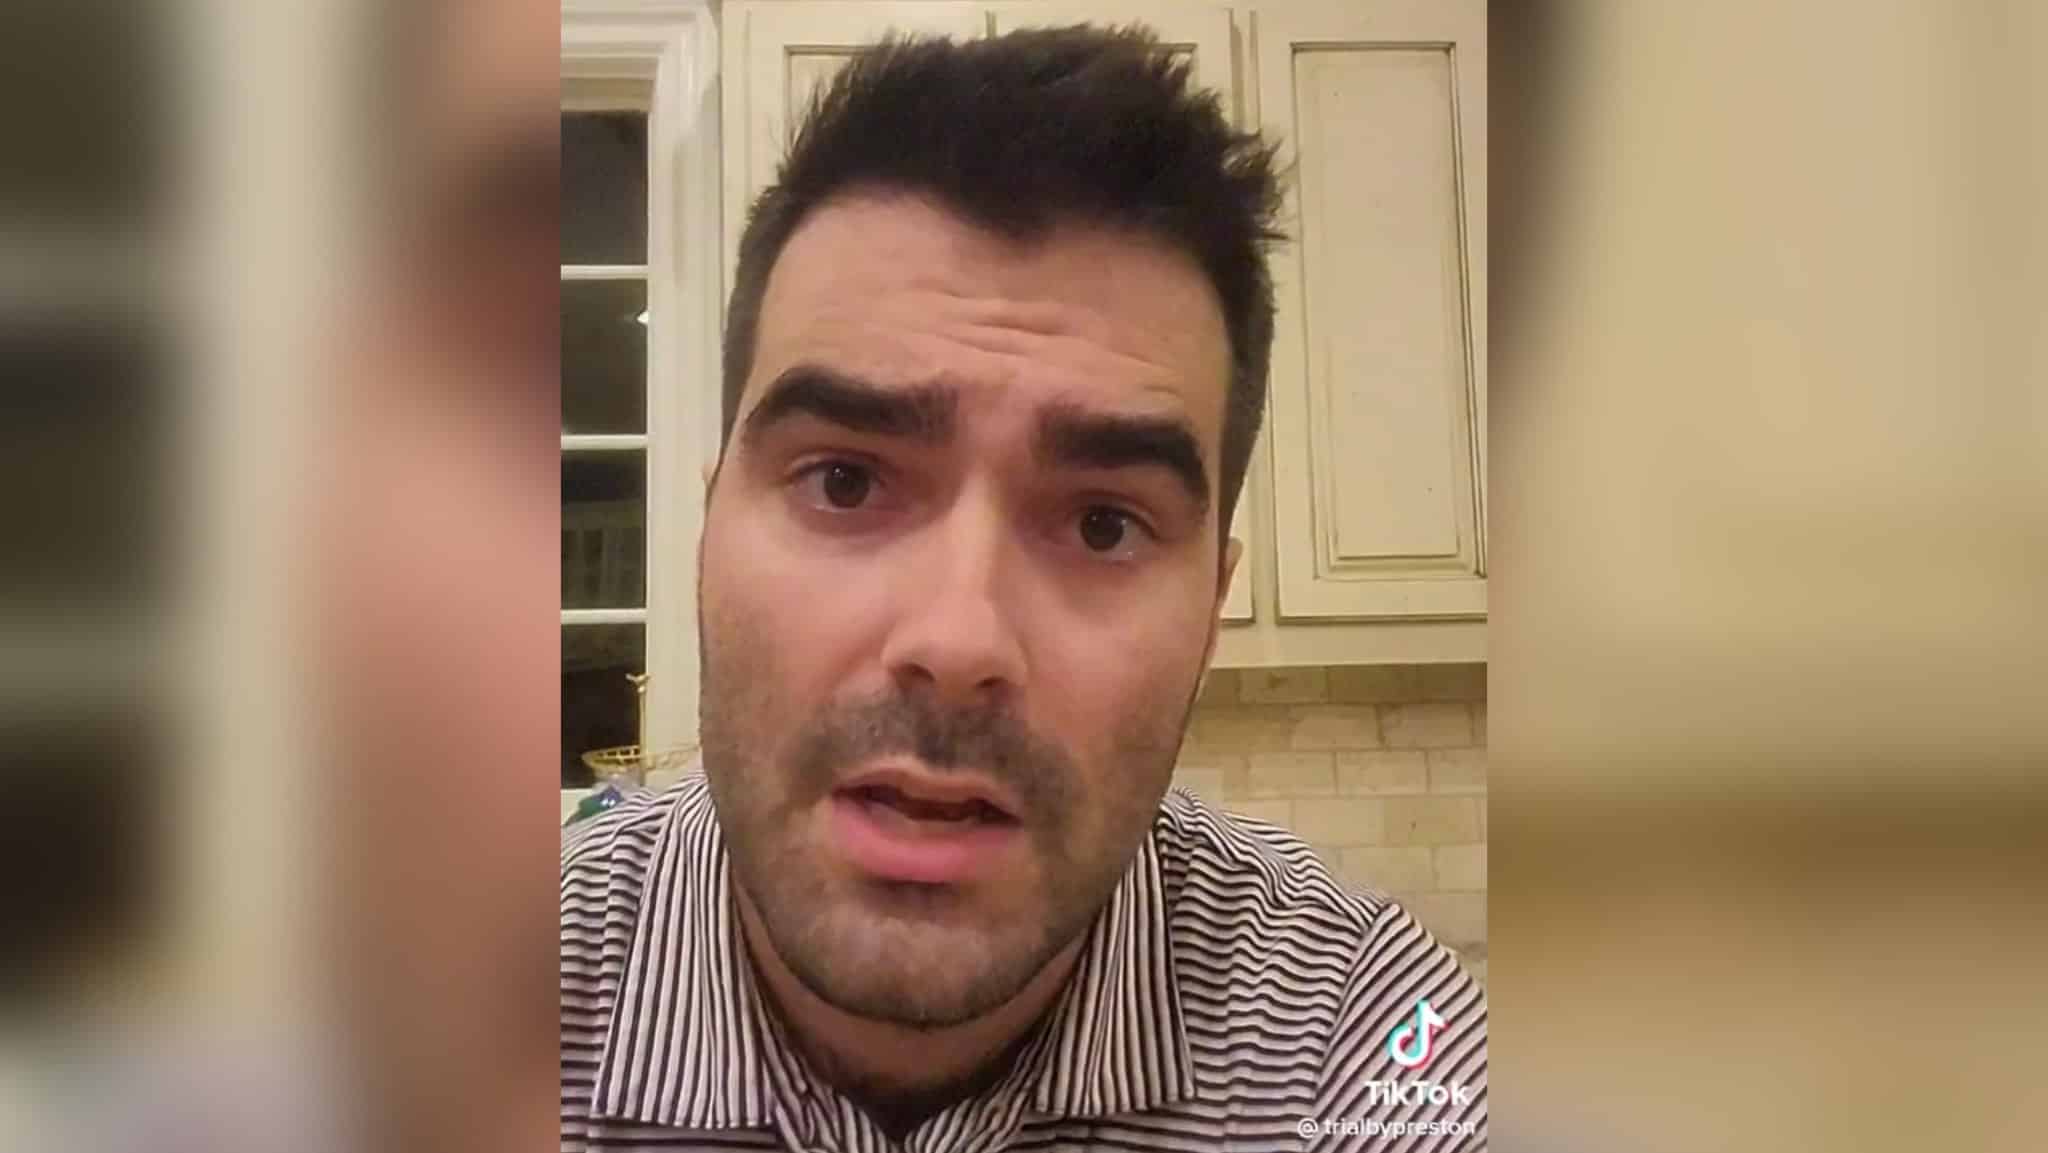 Harvard Attorney and TikTok Influencer Says He was Offered $400 to Make Anti-Trump Propaganda Related to Jan 6 – Shows Receipts (VIDEO)